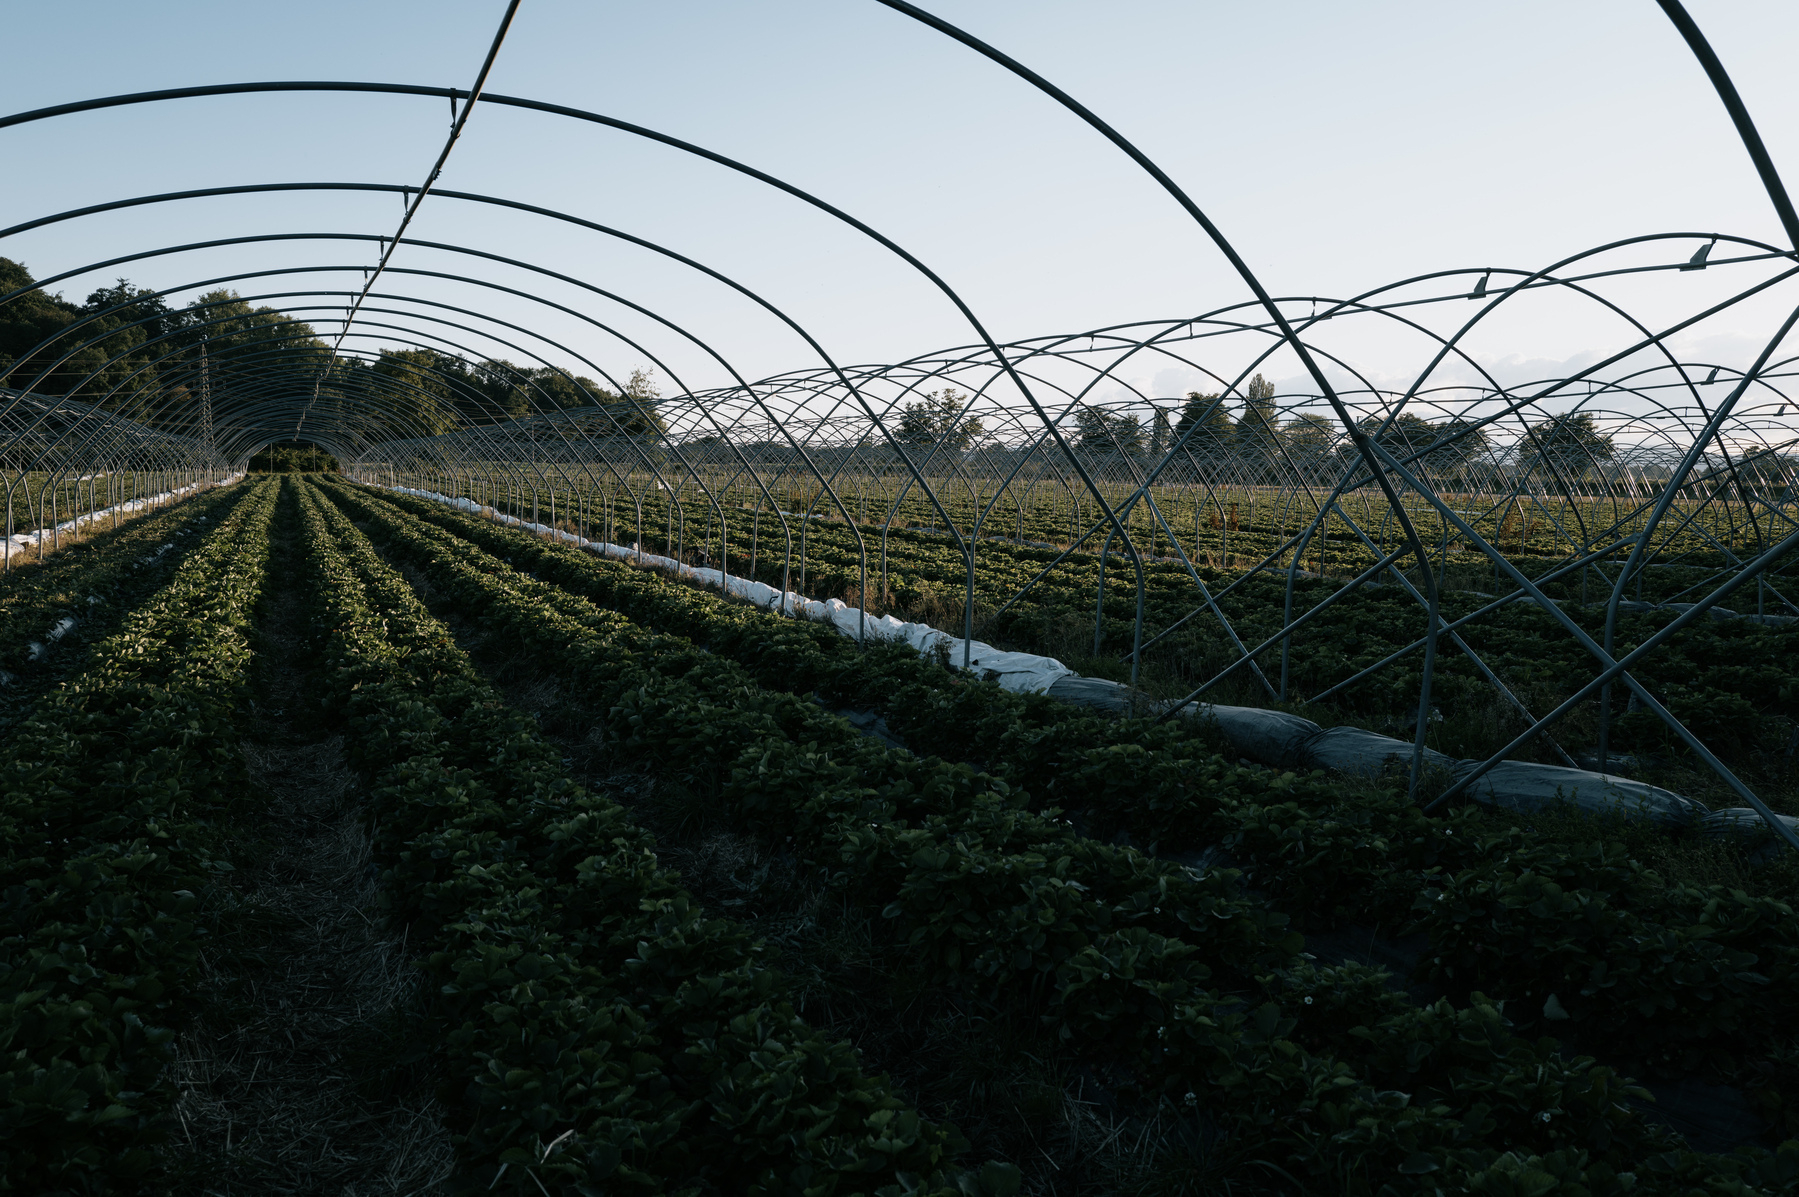 A cloudless sky shortly before dusk. Rows of strawberries extending diagonally into the distance beneath the uncovered semi-circular metal skeleton structures of large greenhouses. In the distance a tree line is visible.